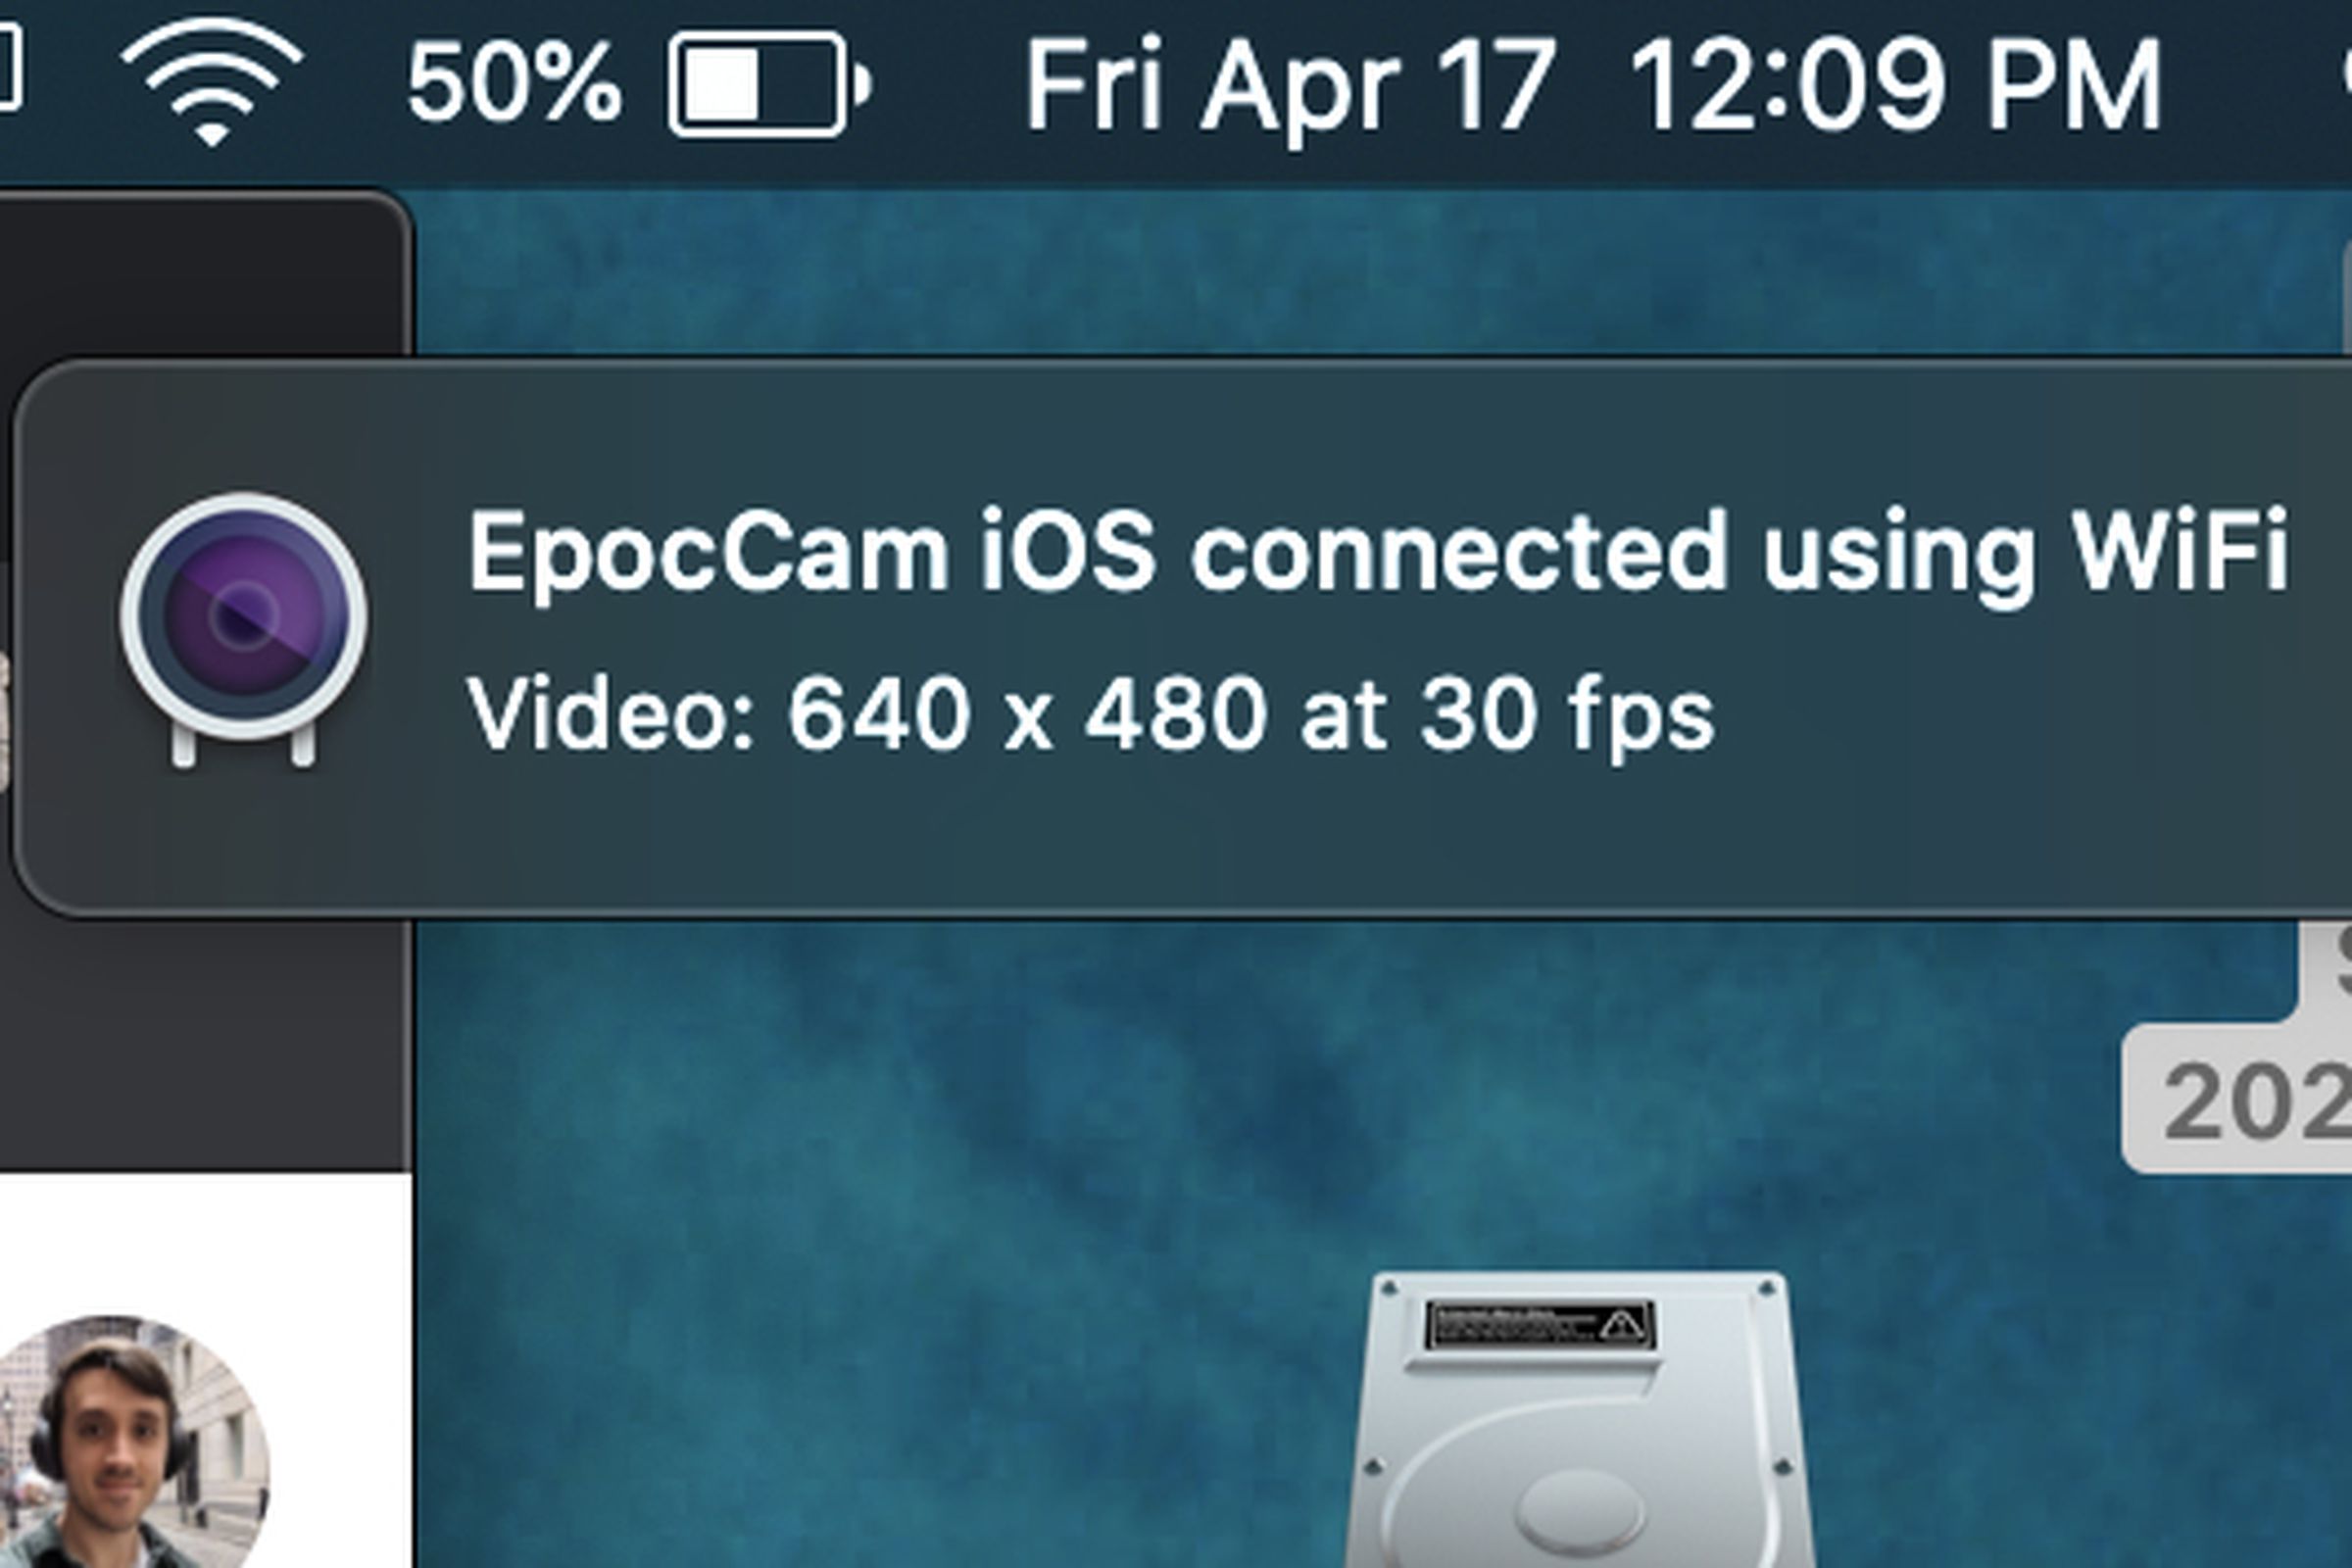 Look for this notification when EpocCam activates on your PC.